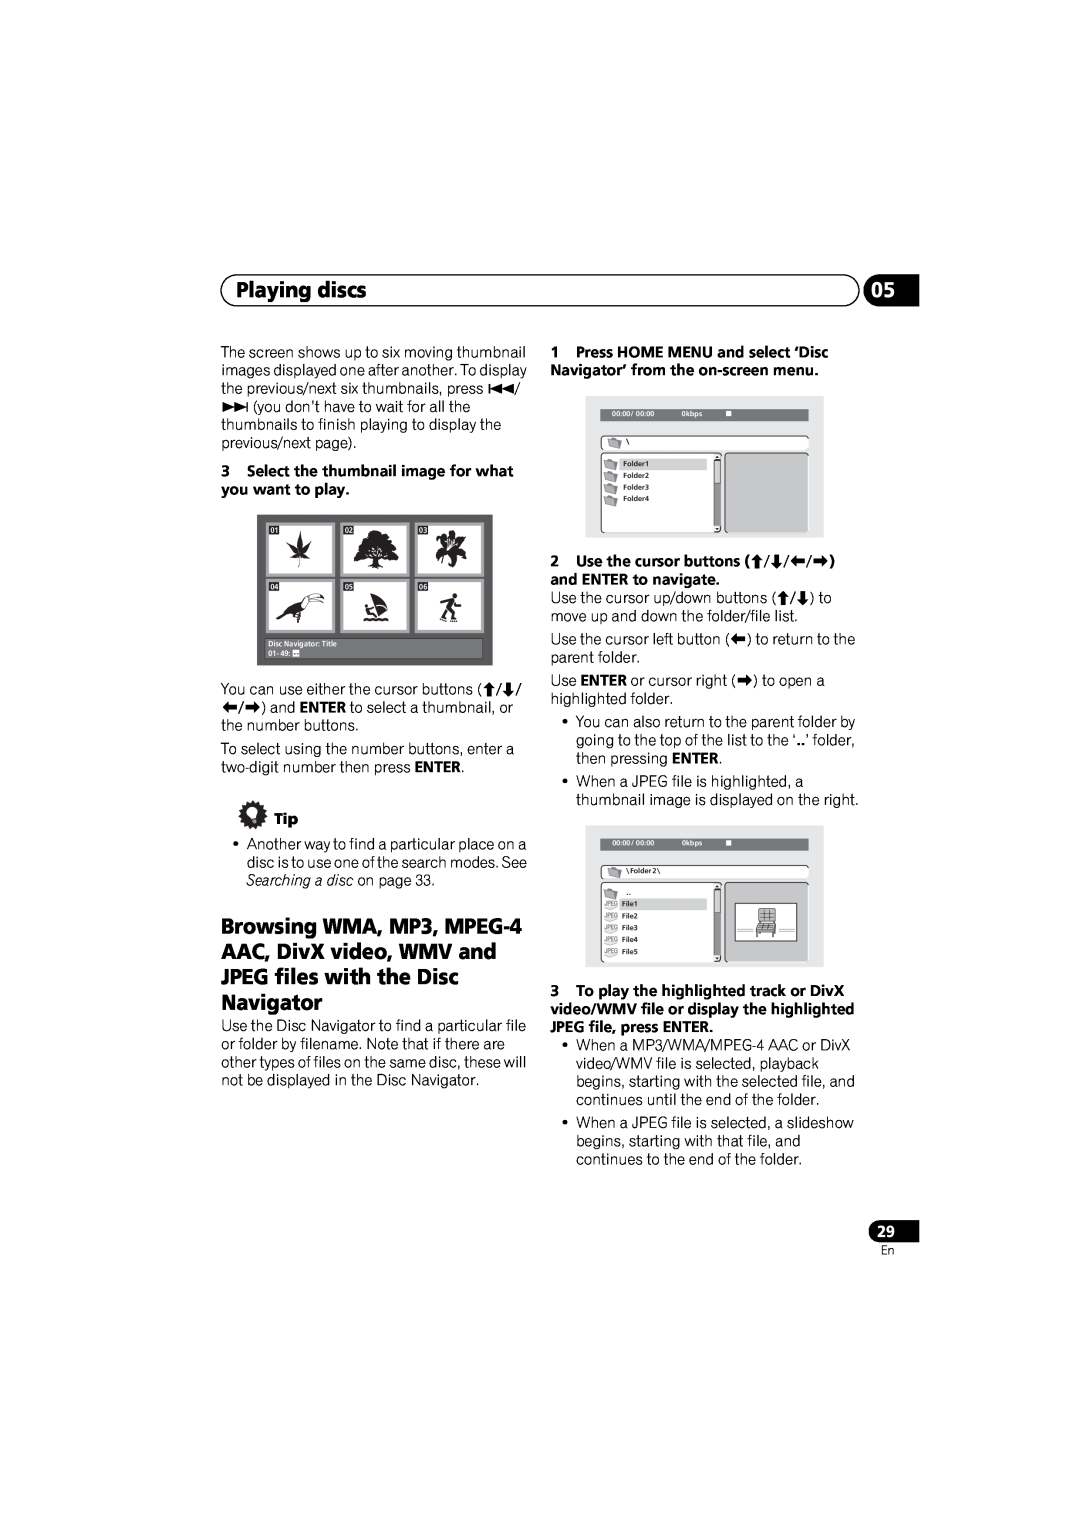 Pioneer DV-48AV operating instructions Playing discs, Select the thumbnail image for what you want to play 